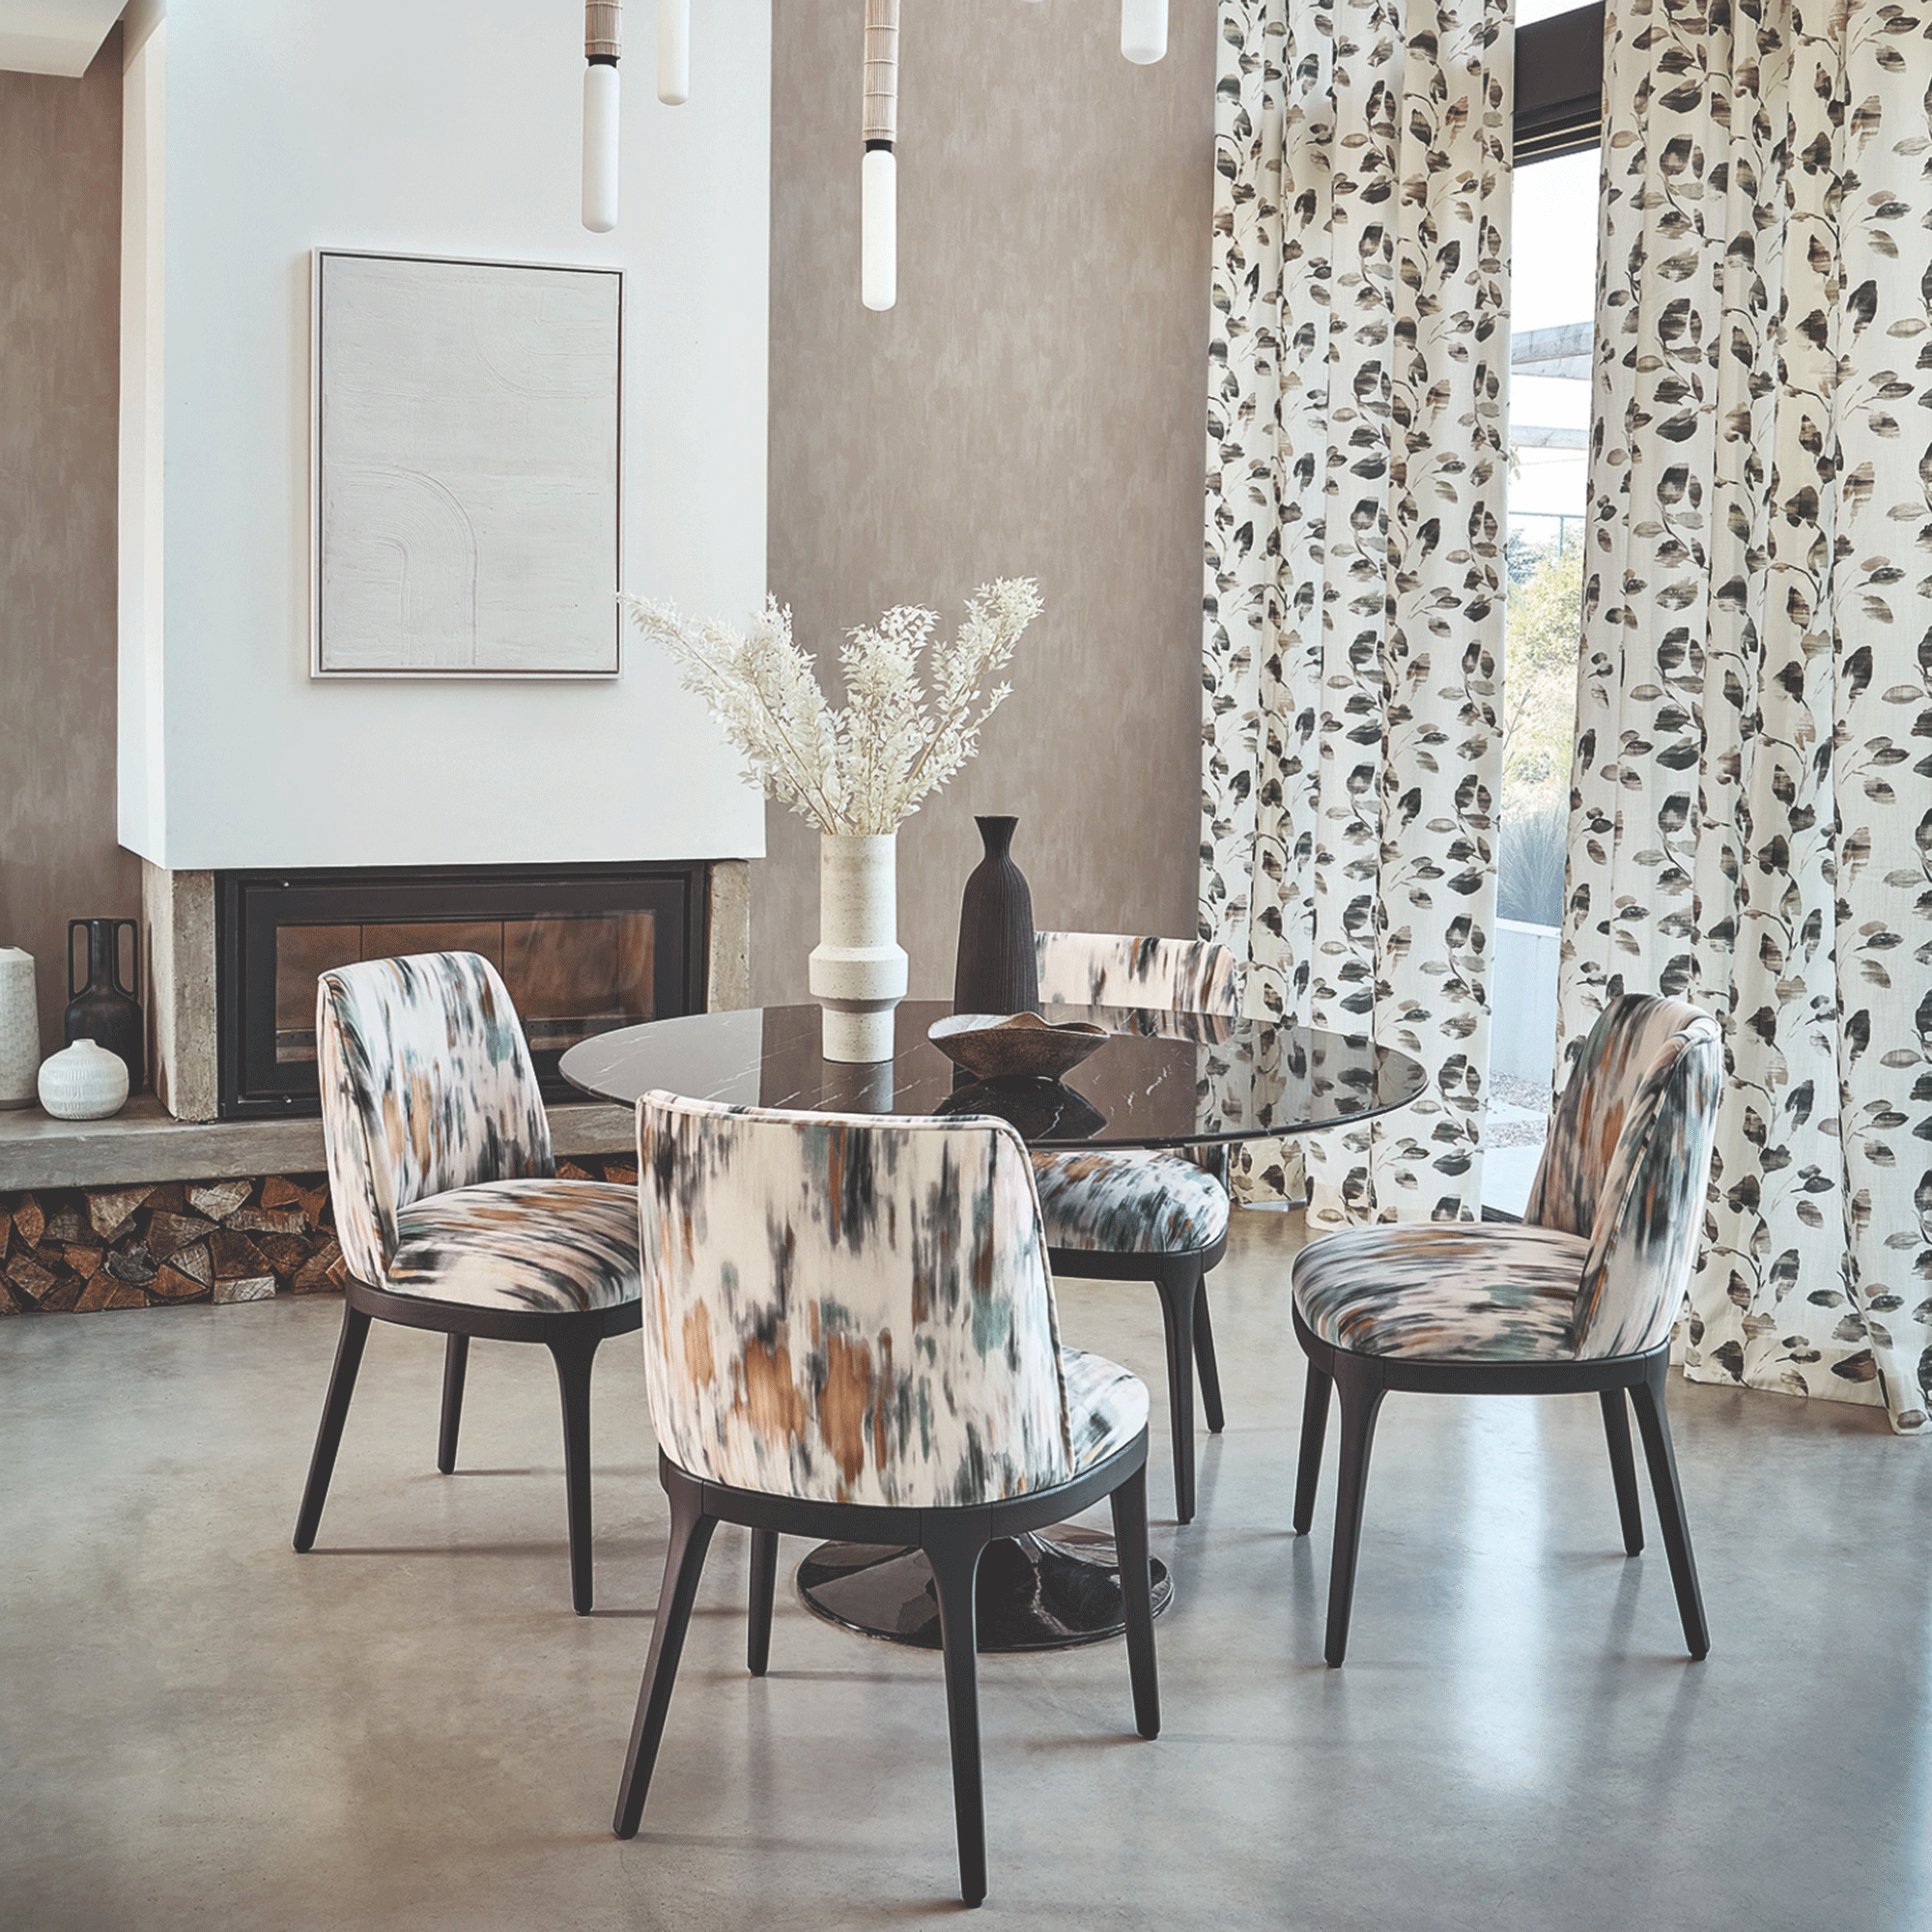 Patterned curtains and chairs in dining room